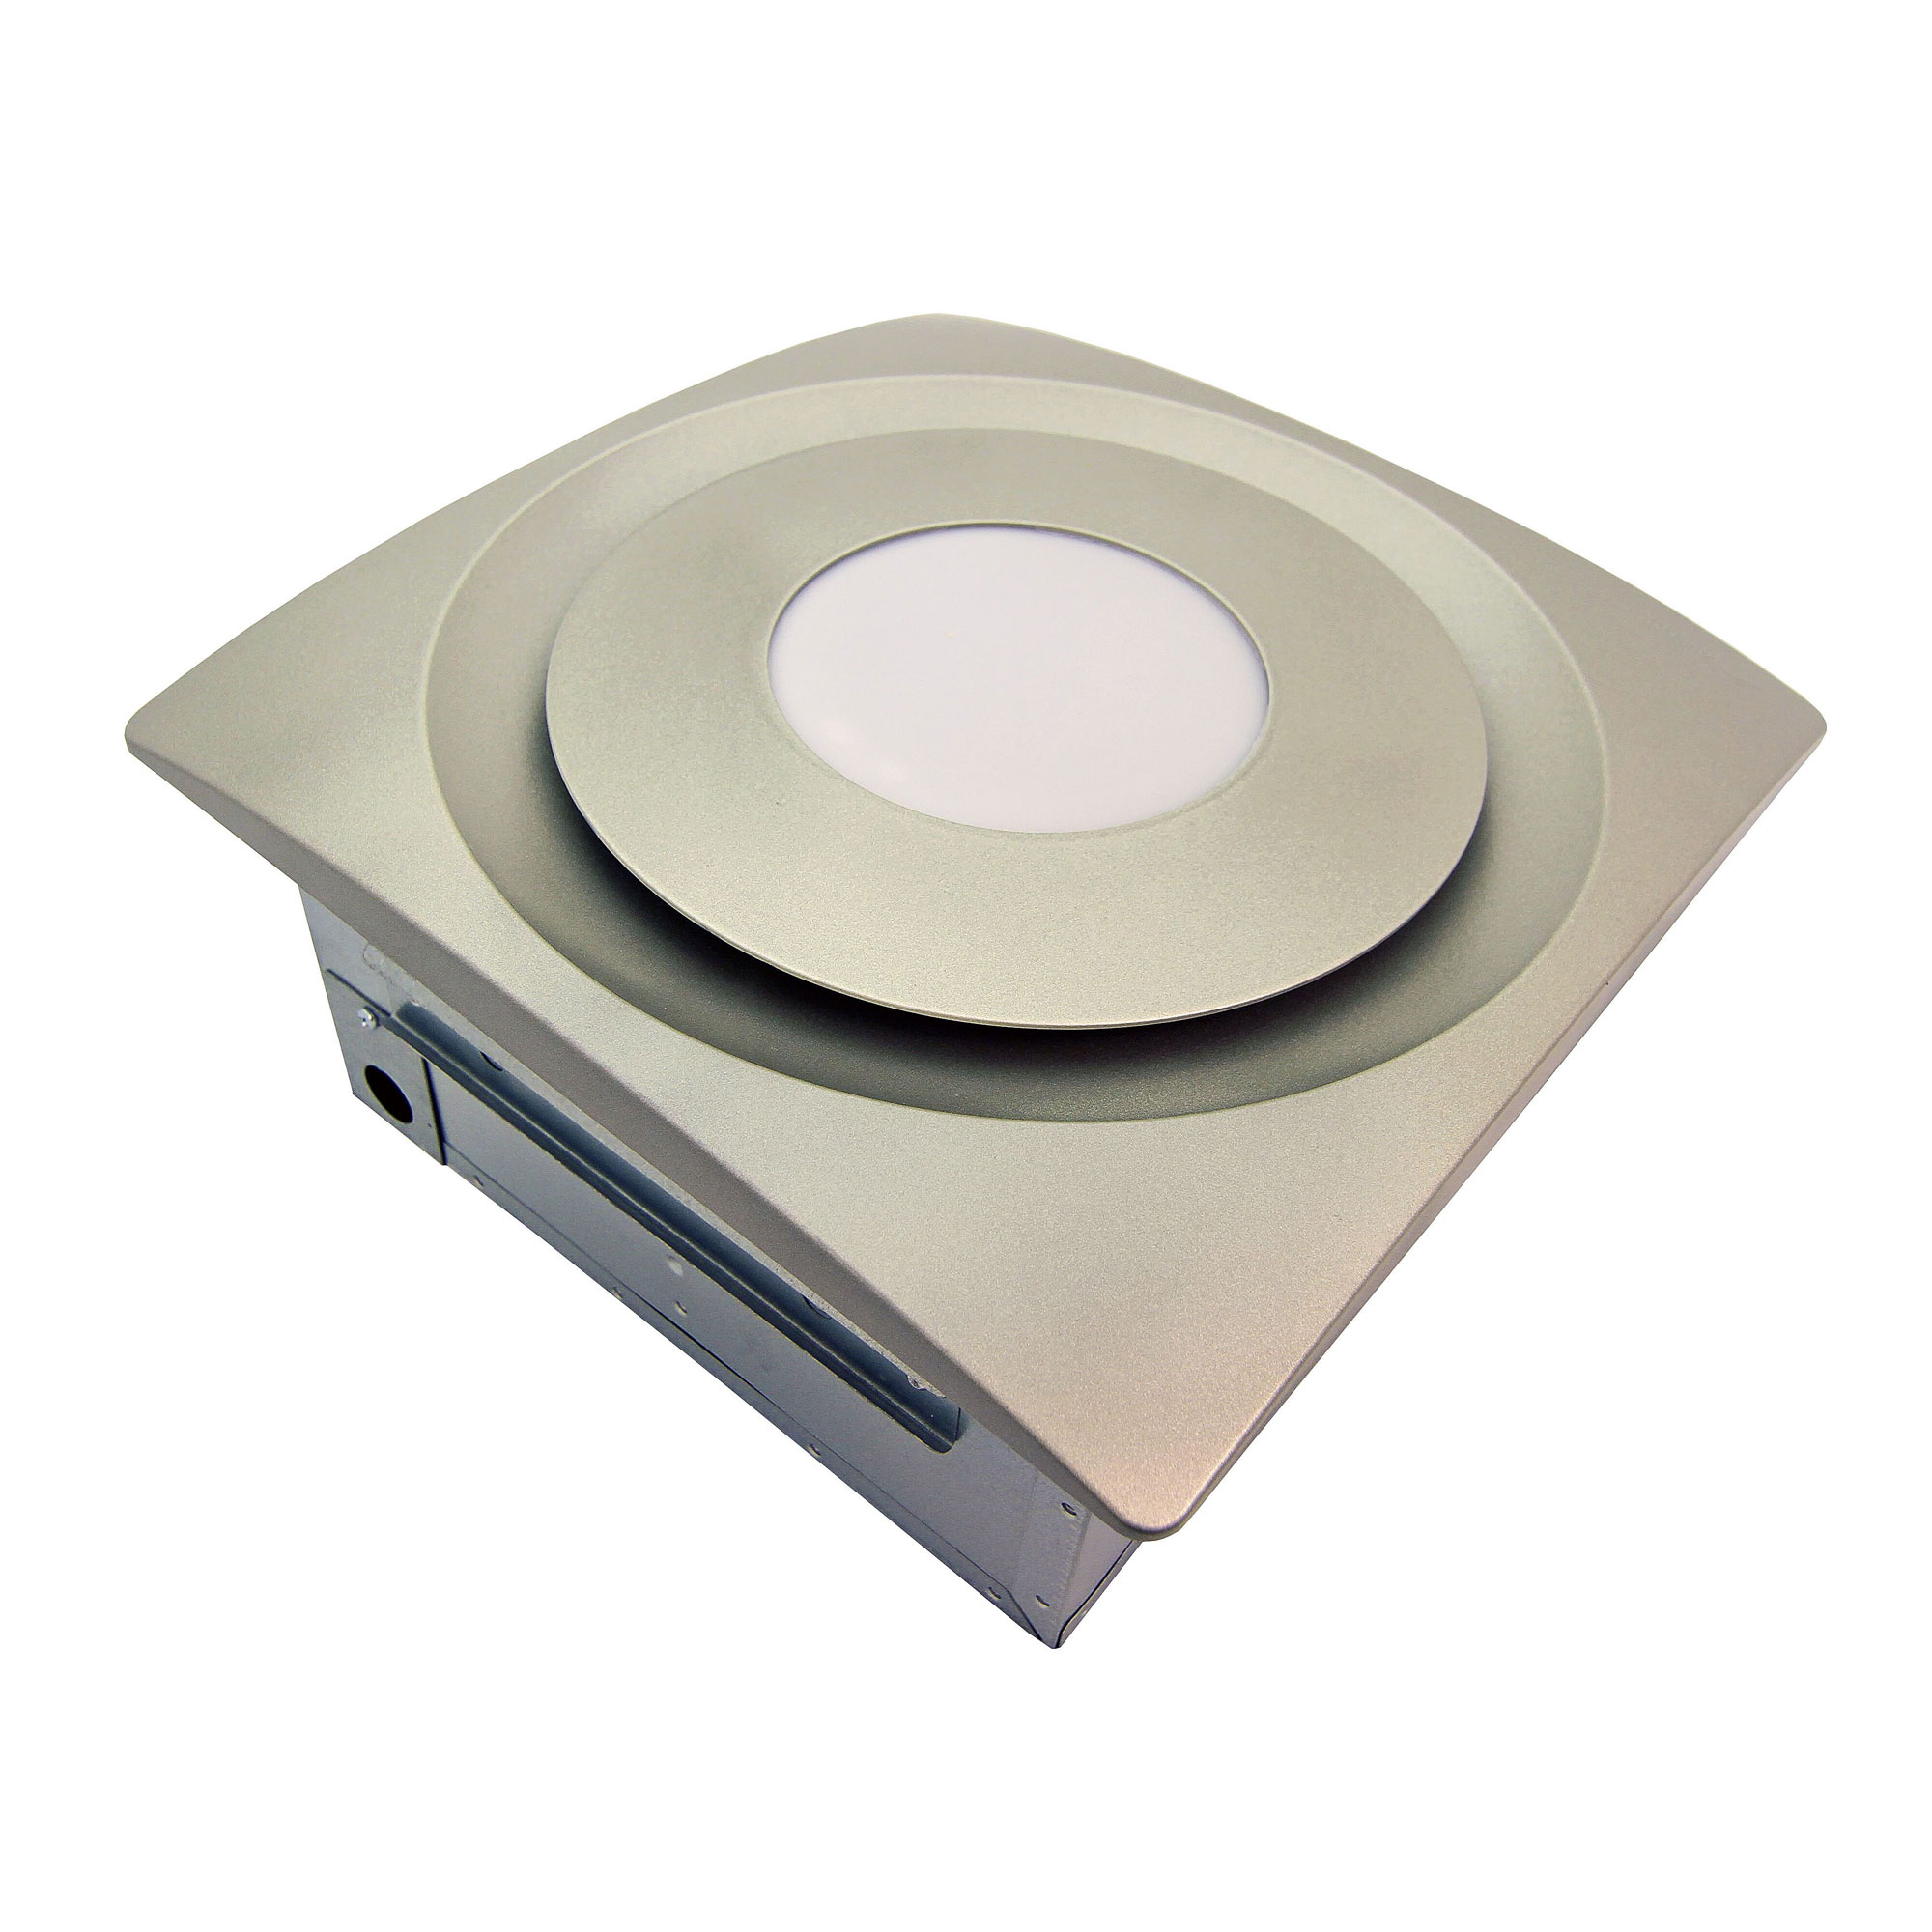 Ap904h Slim Fit Exhaust Fan With Lighthumidity Sensor Aero Pure Ap904h Sl Sn pertaining to measurements 2000 X 2000